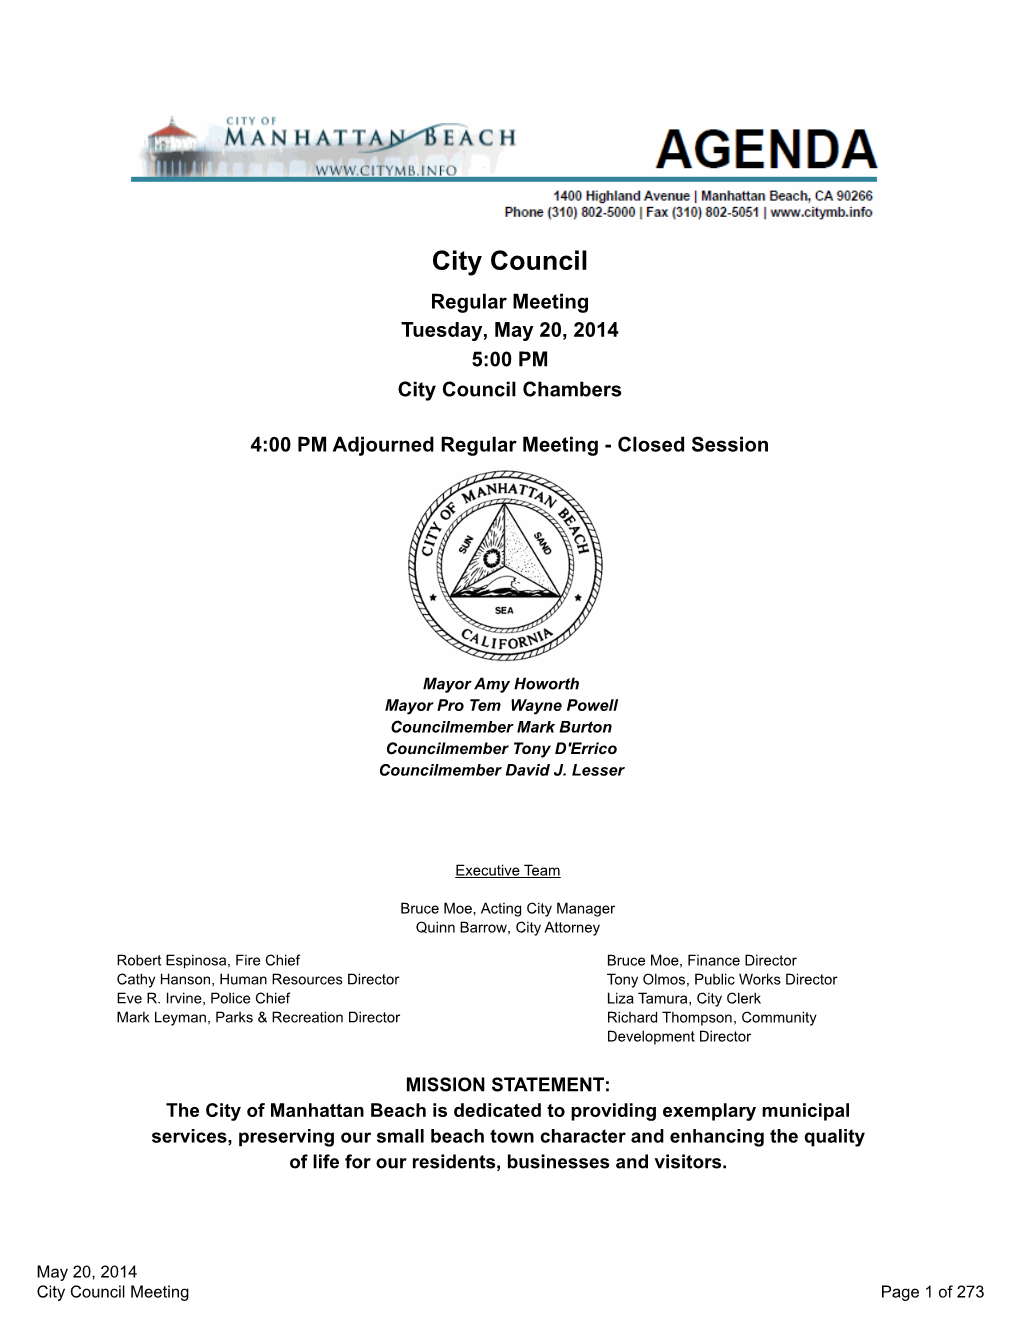 City Council Regular Meeting Tuesday, May 20, 2014 5:00 PM City Council Chambers